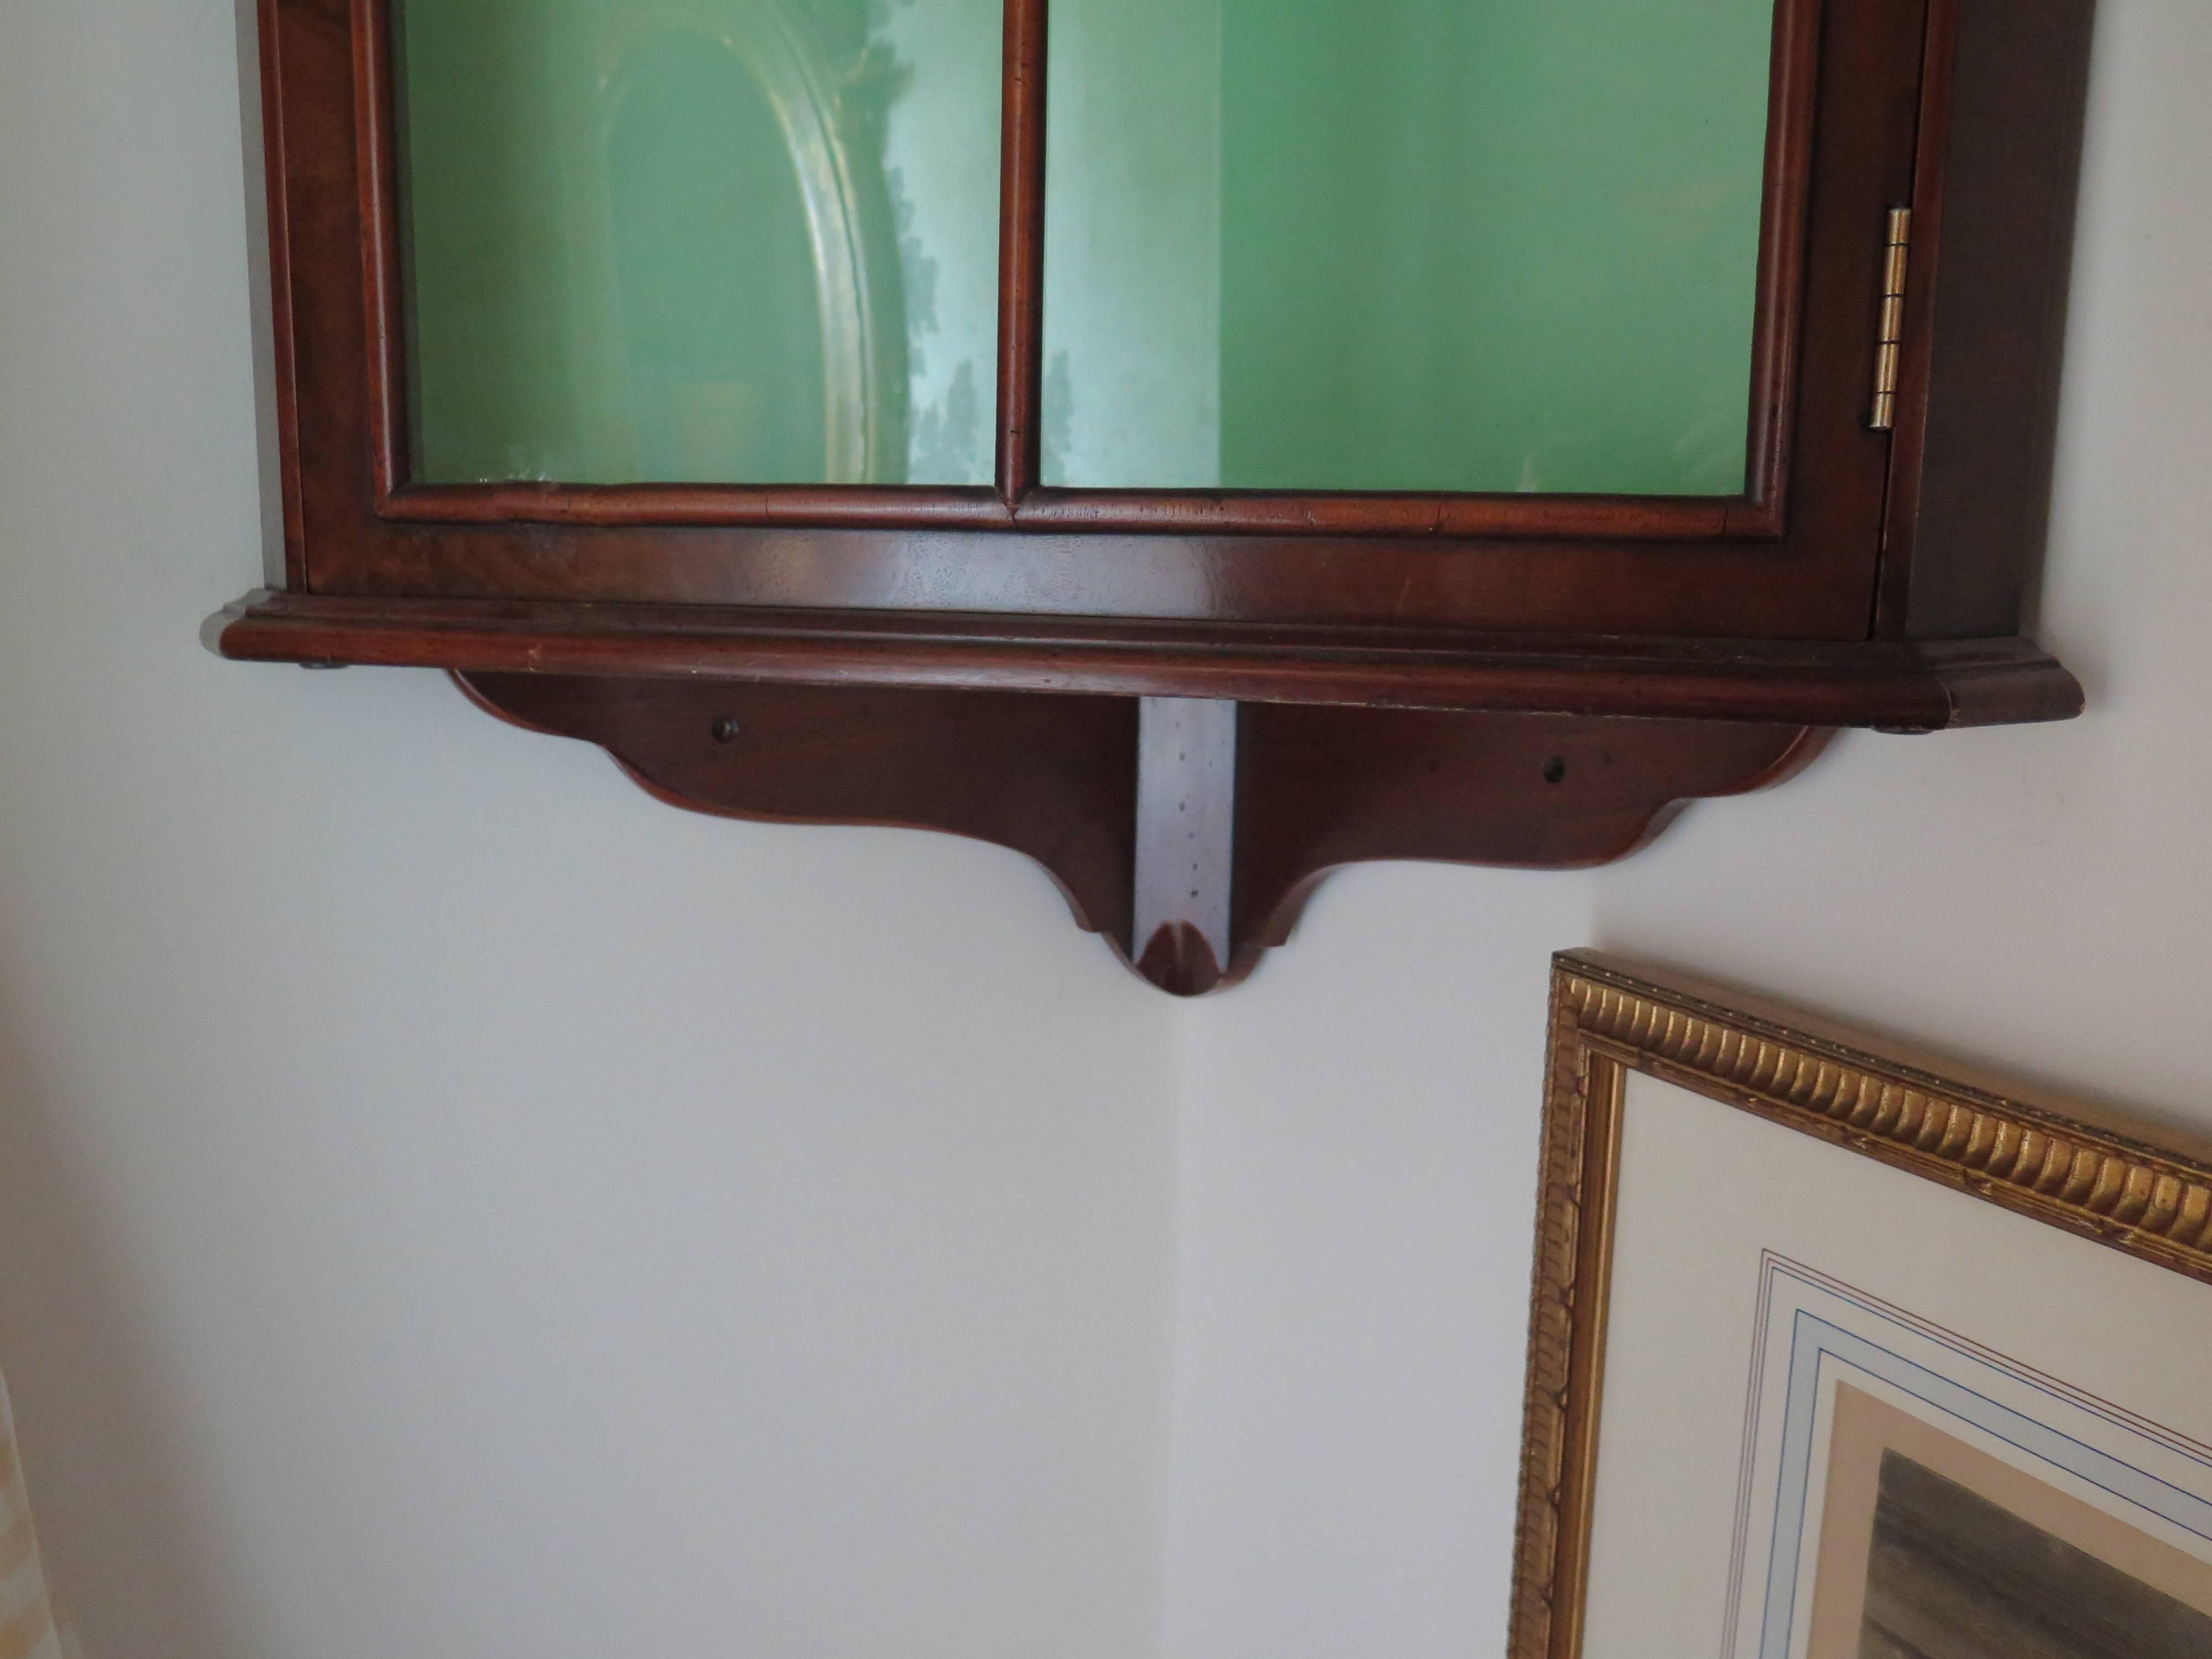 The hanging corner cabinet having a domed cornice above glazed astragal door, opening to a shleved, lined interior.